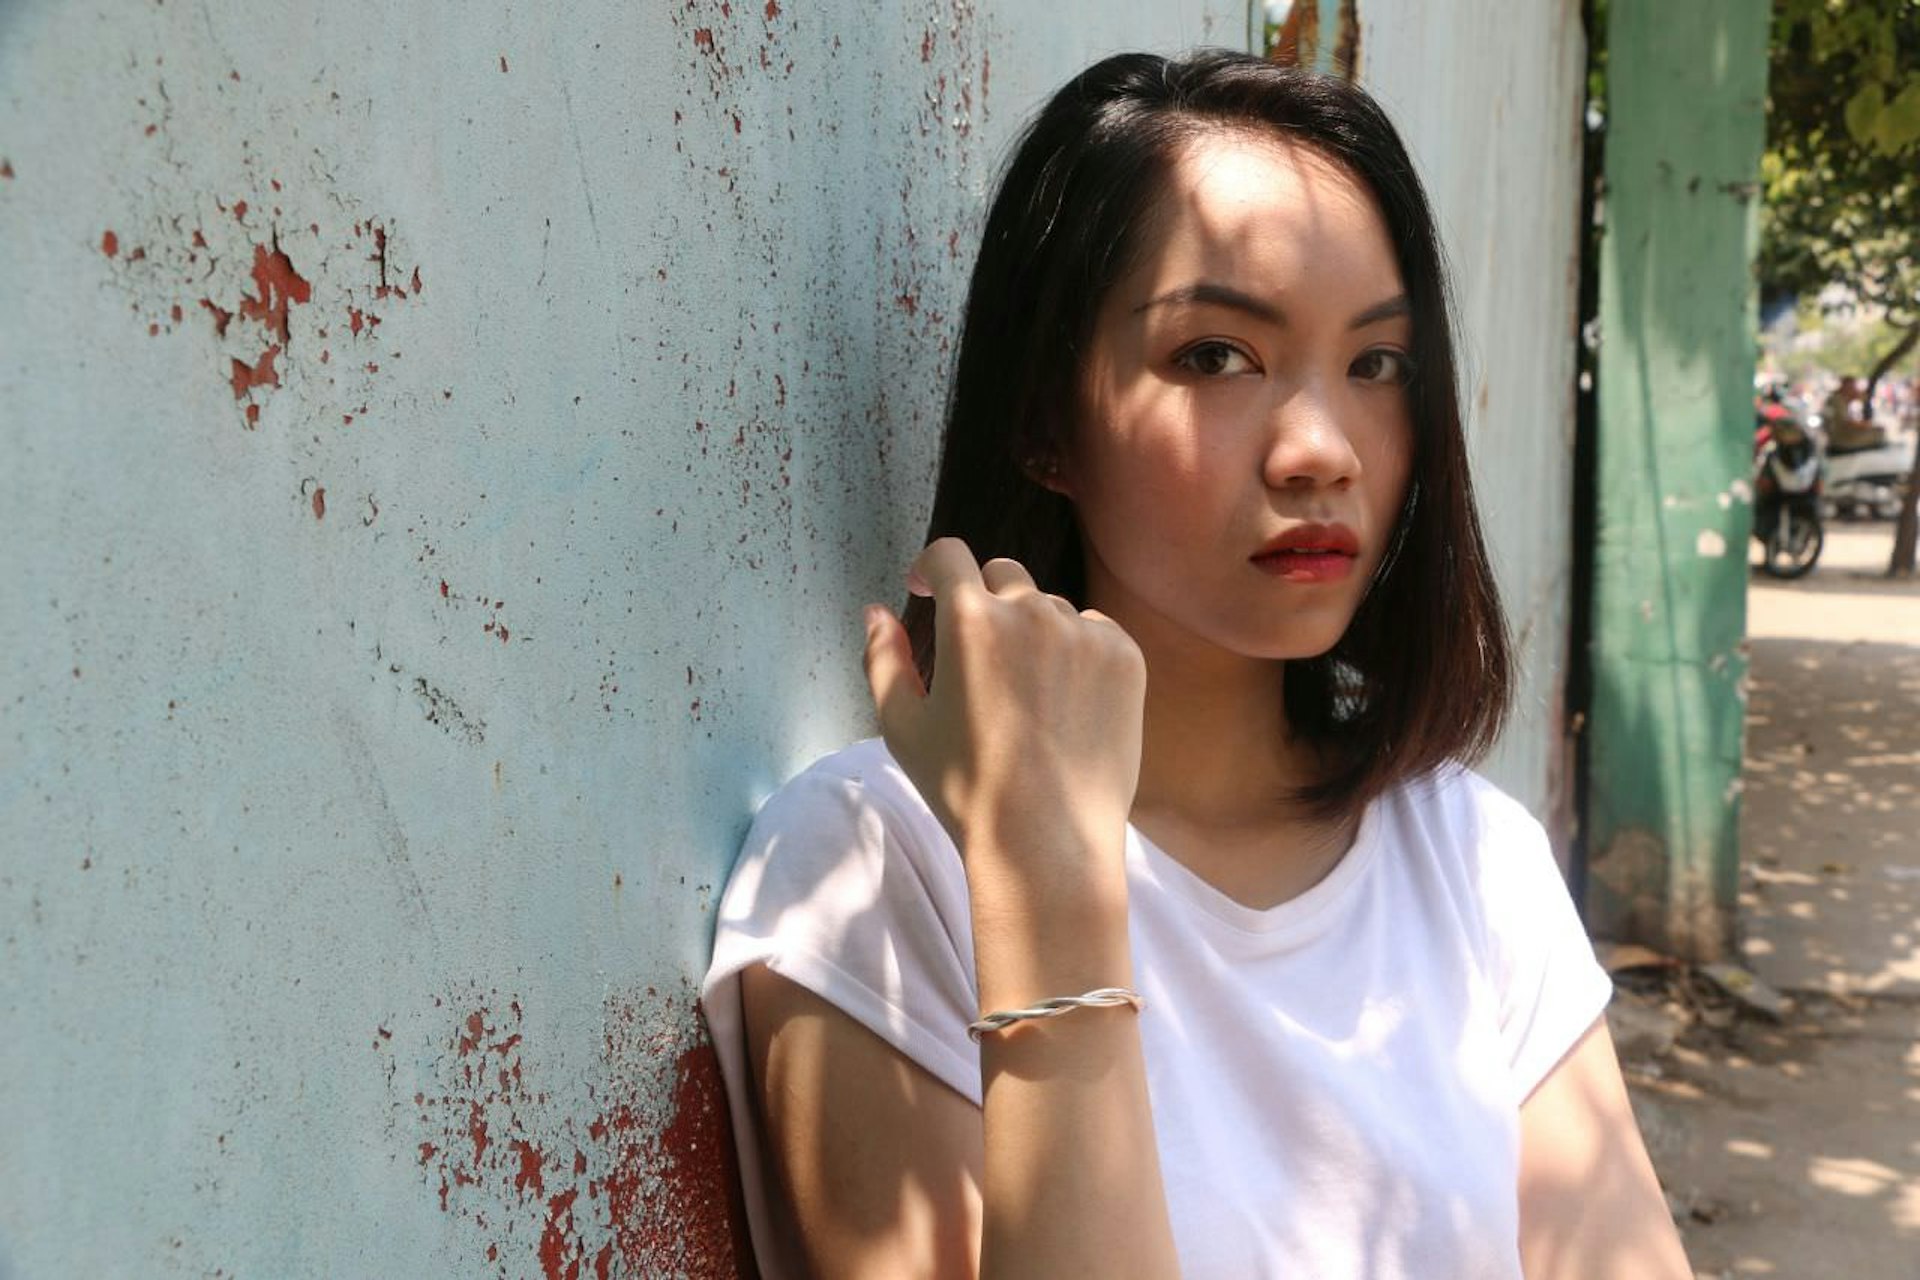 A young dark-haired woman with red lipstick, sporting a serious expression and wearing a loose white T-shirt, holds her wrist towards the camera, modelling a simple but stylish metal bracelet, one of the products sold by Saigon Armory in Vietnam